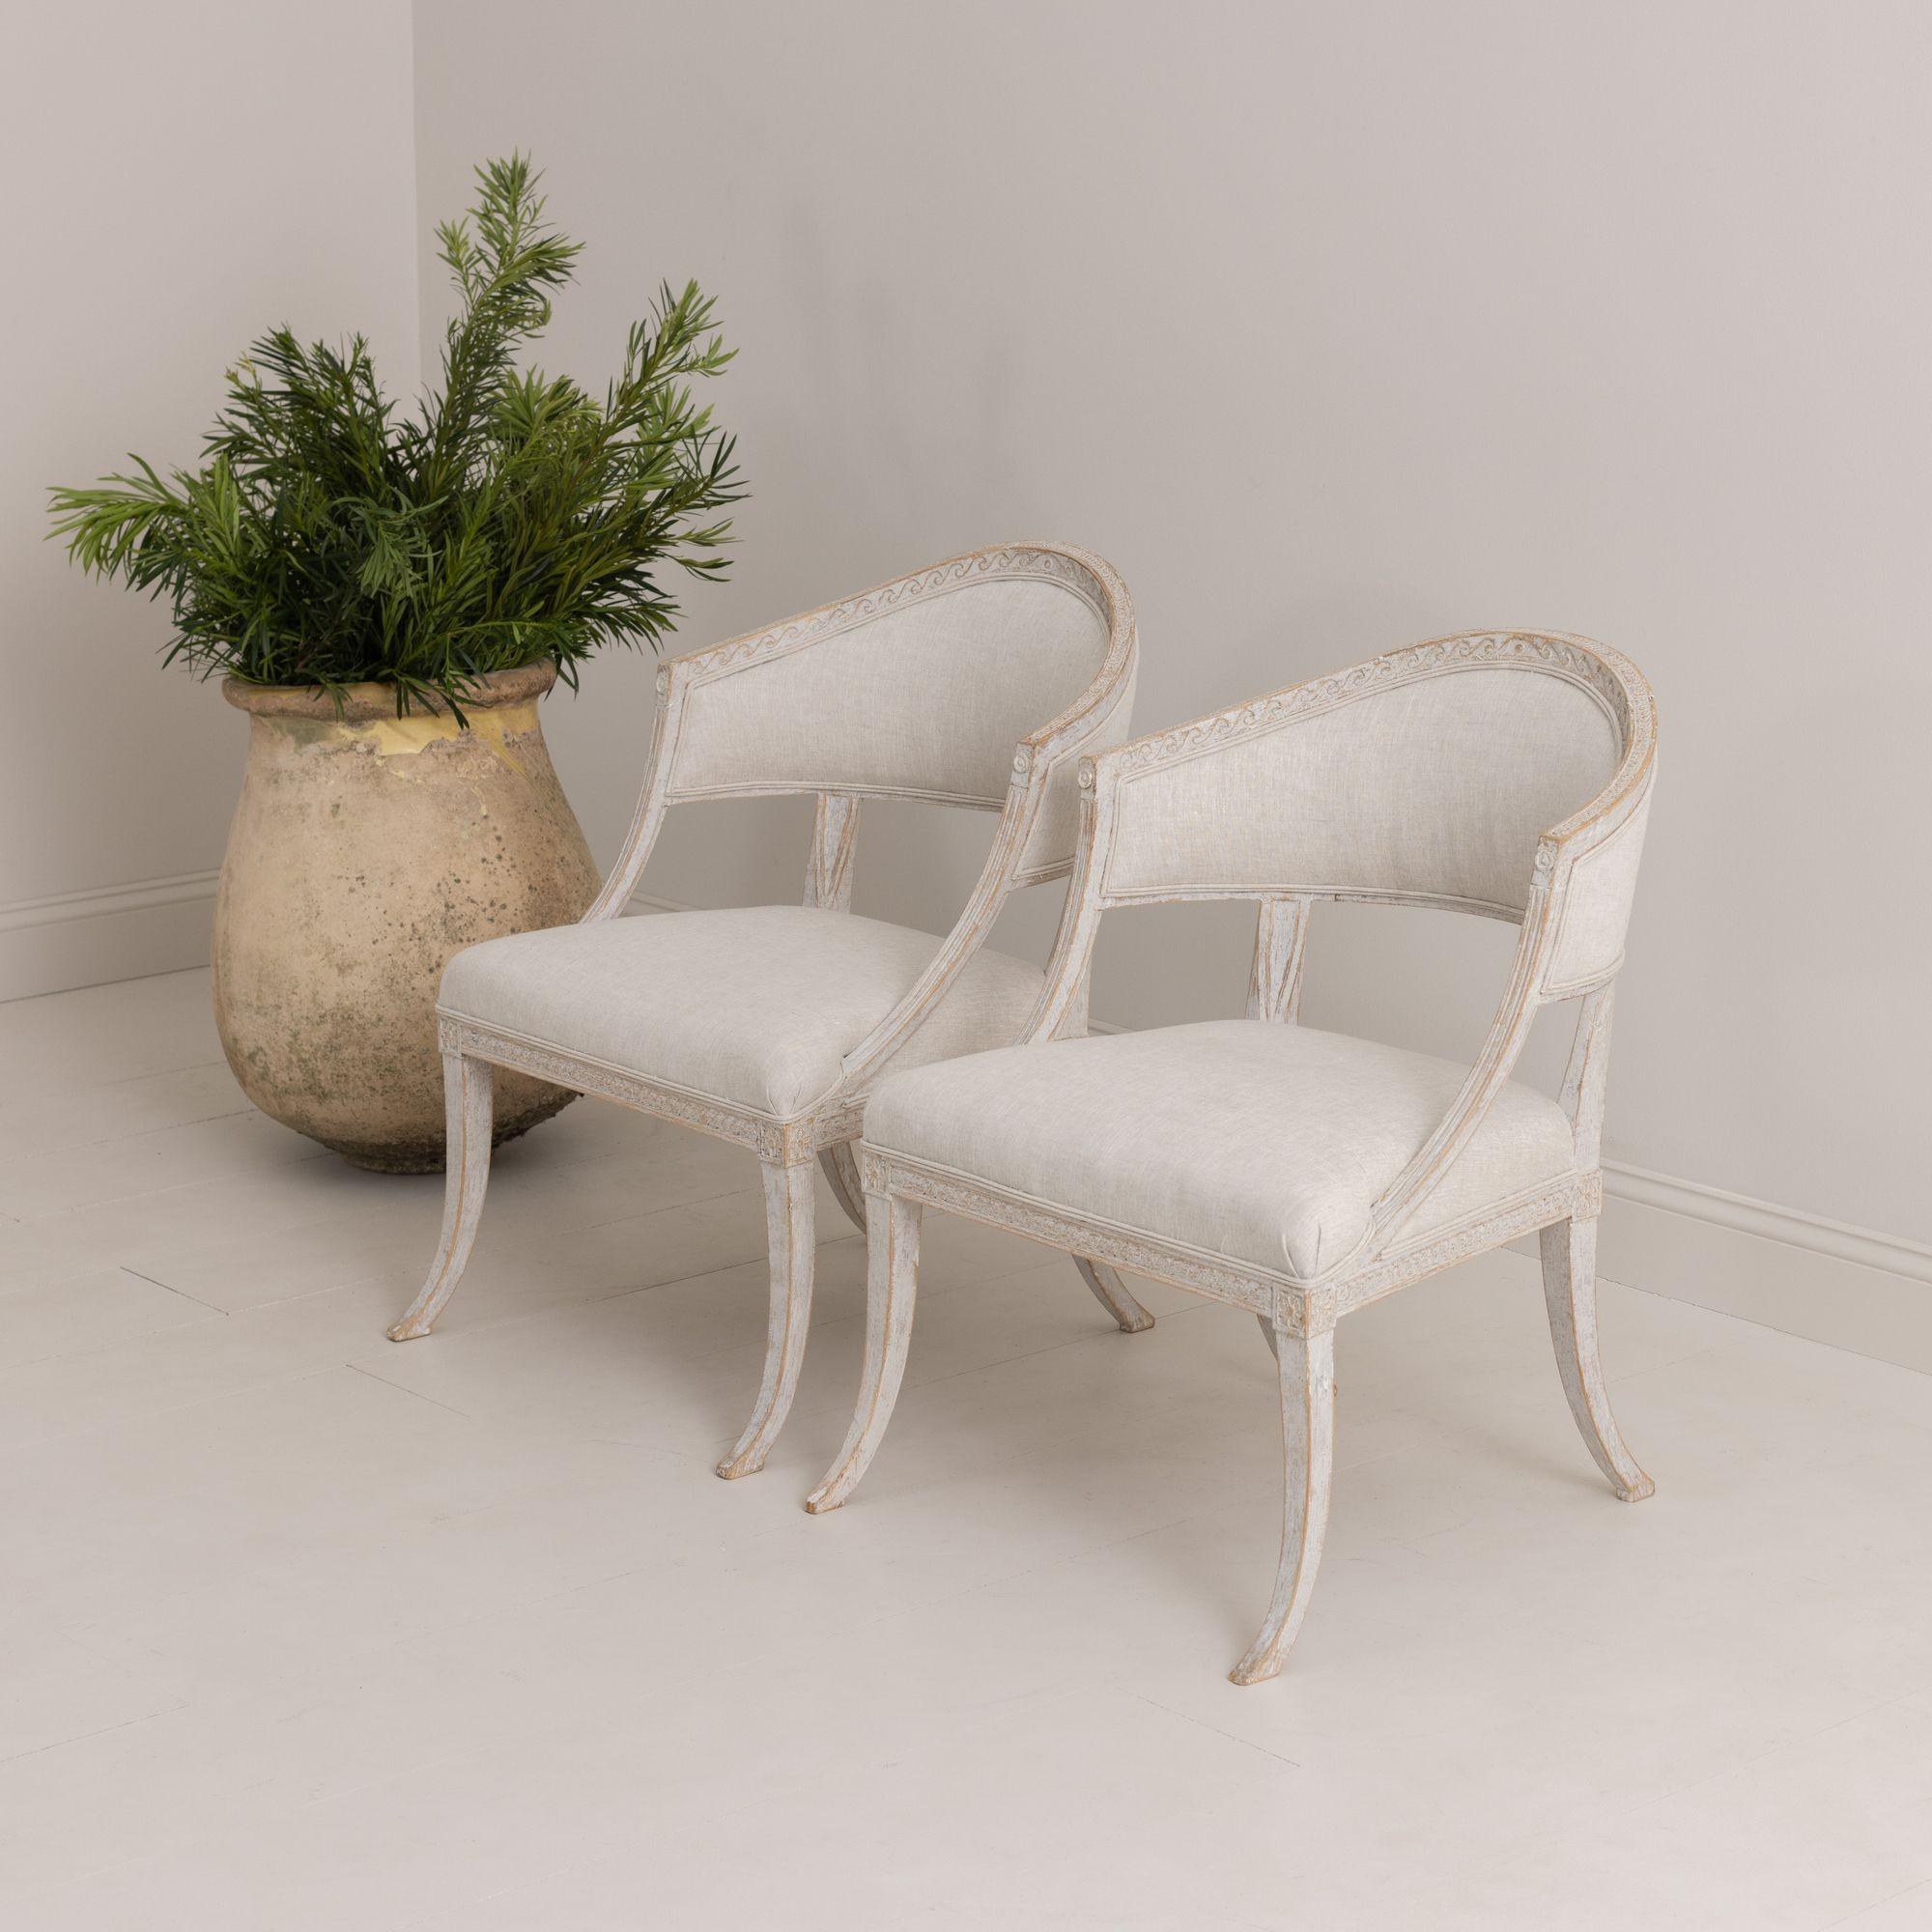 20th Century Pair of Swedish Gustavian Style Painted Barrel Back Armchairs